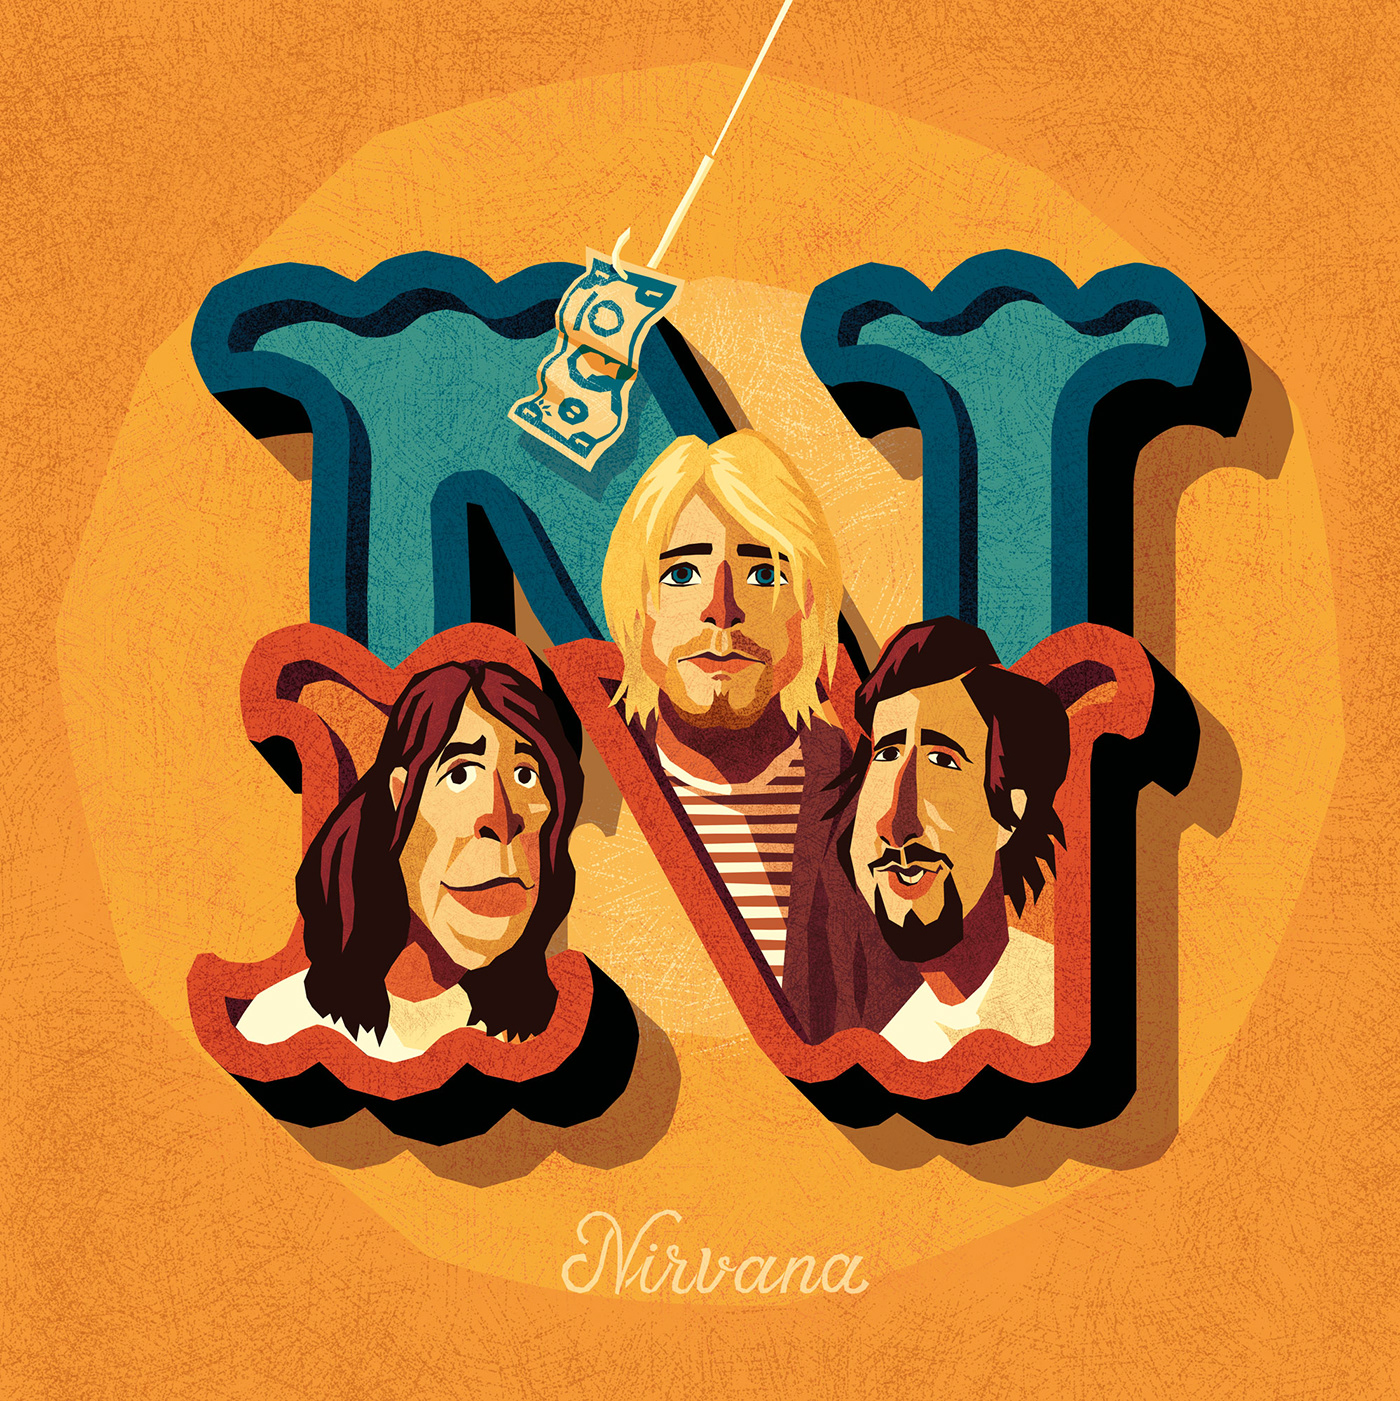 Decorative capital letter N with caricatures of the band Nirvana